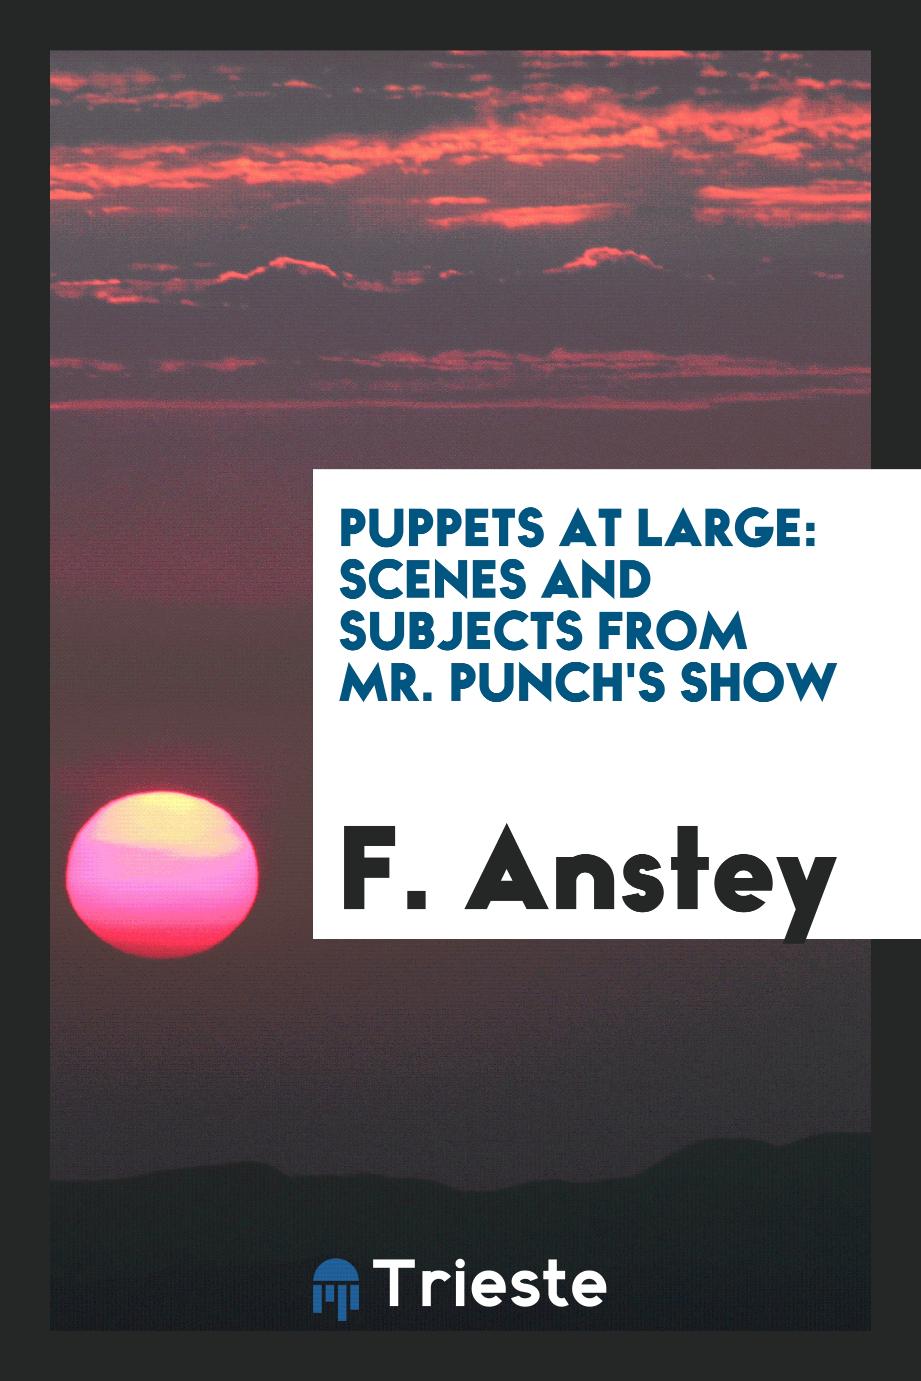 Puppets at large: scenes and subjects from Mr. Punch's show